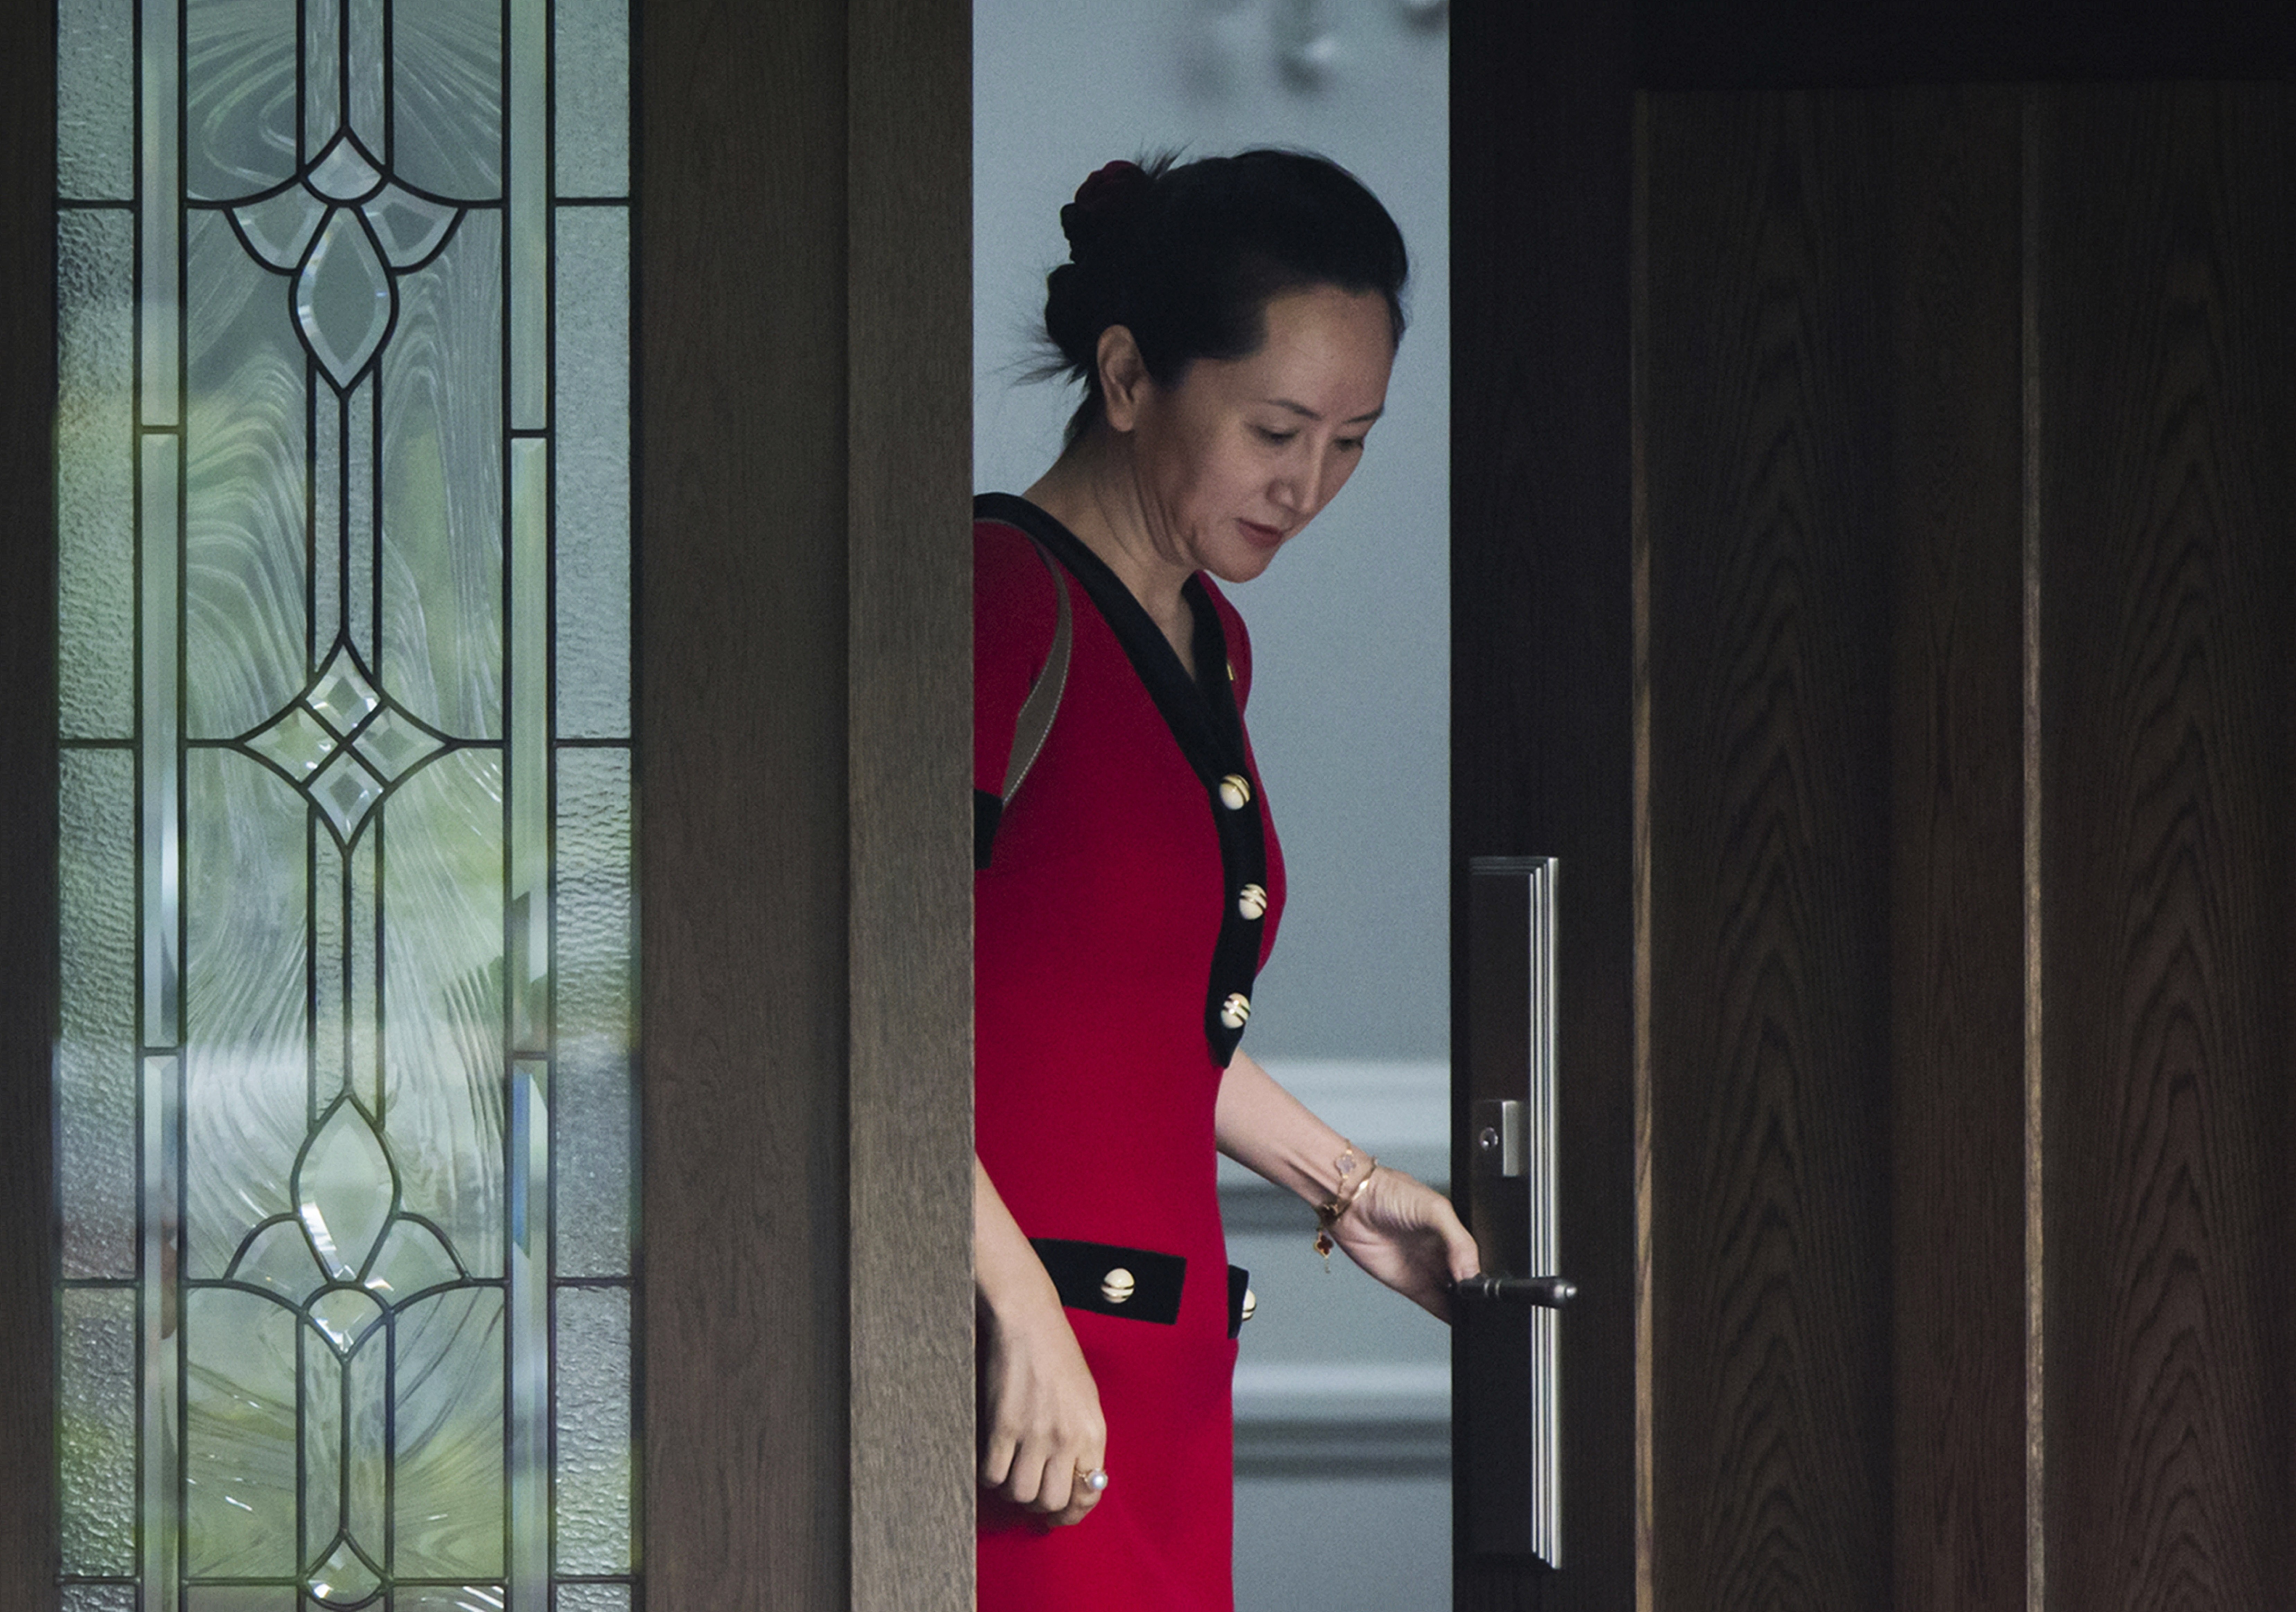 Huawei chief financial officer Meng Wanzhou leaves her home to attend a court hearing in Vancouver in October. Photo: The Canadian Press via AP